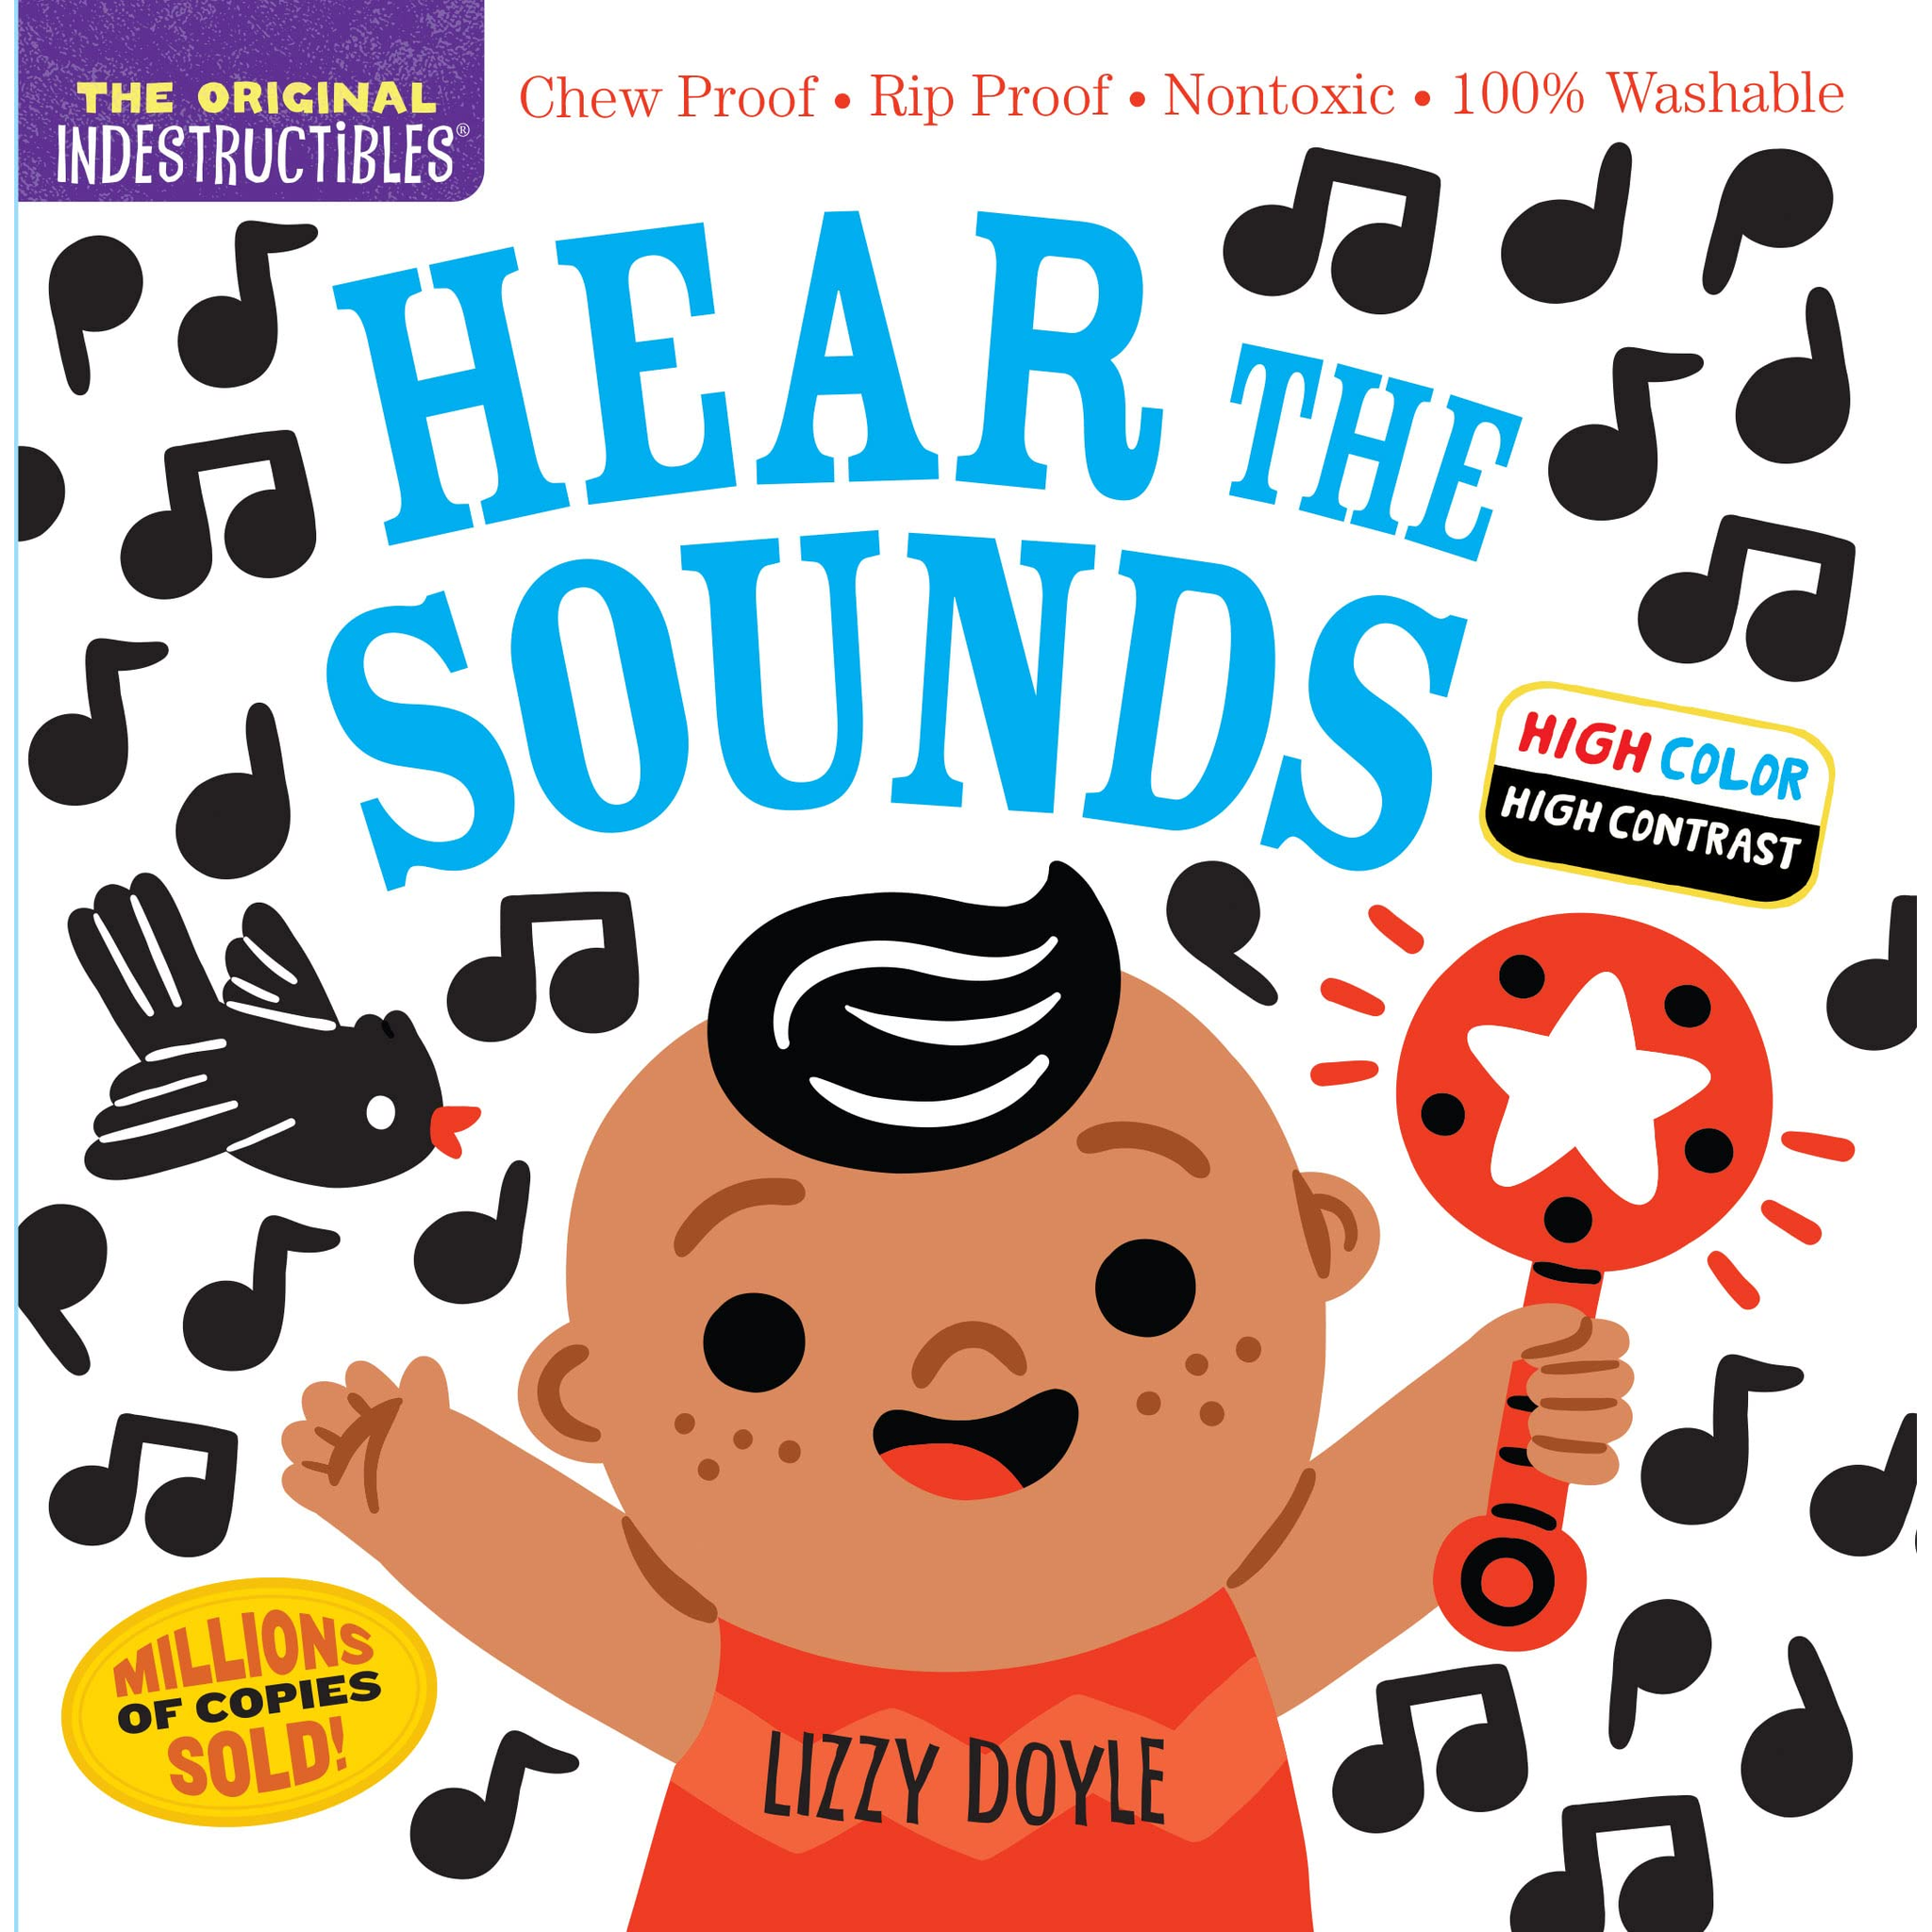 Indestructibles Baby Books Indestructibles: Hear the Sounds (High Color High Contrast)